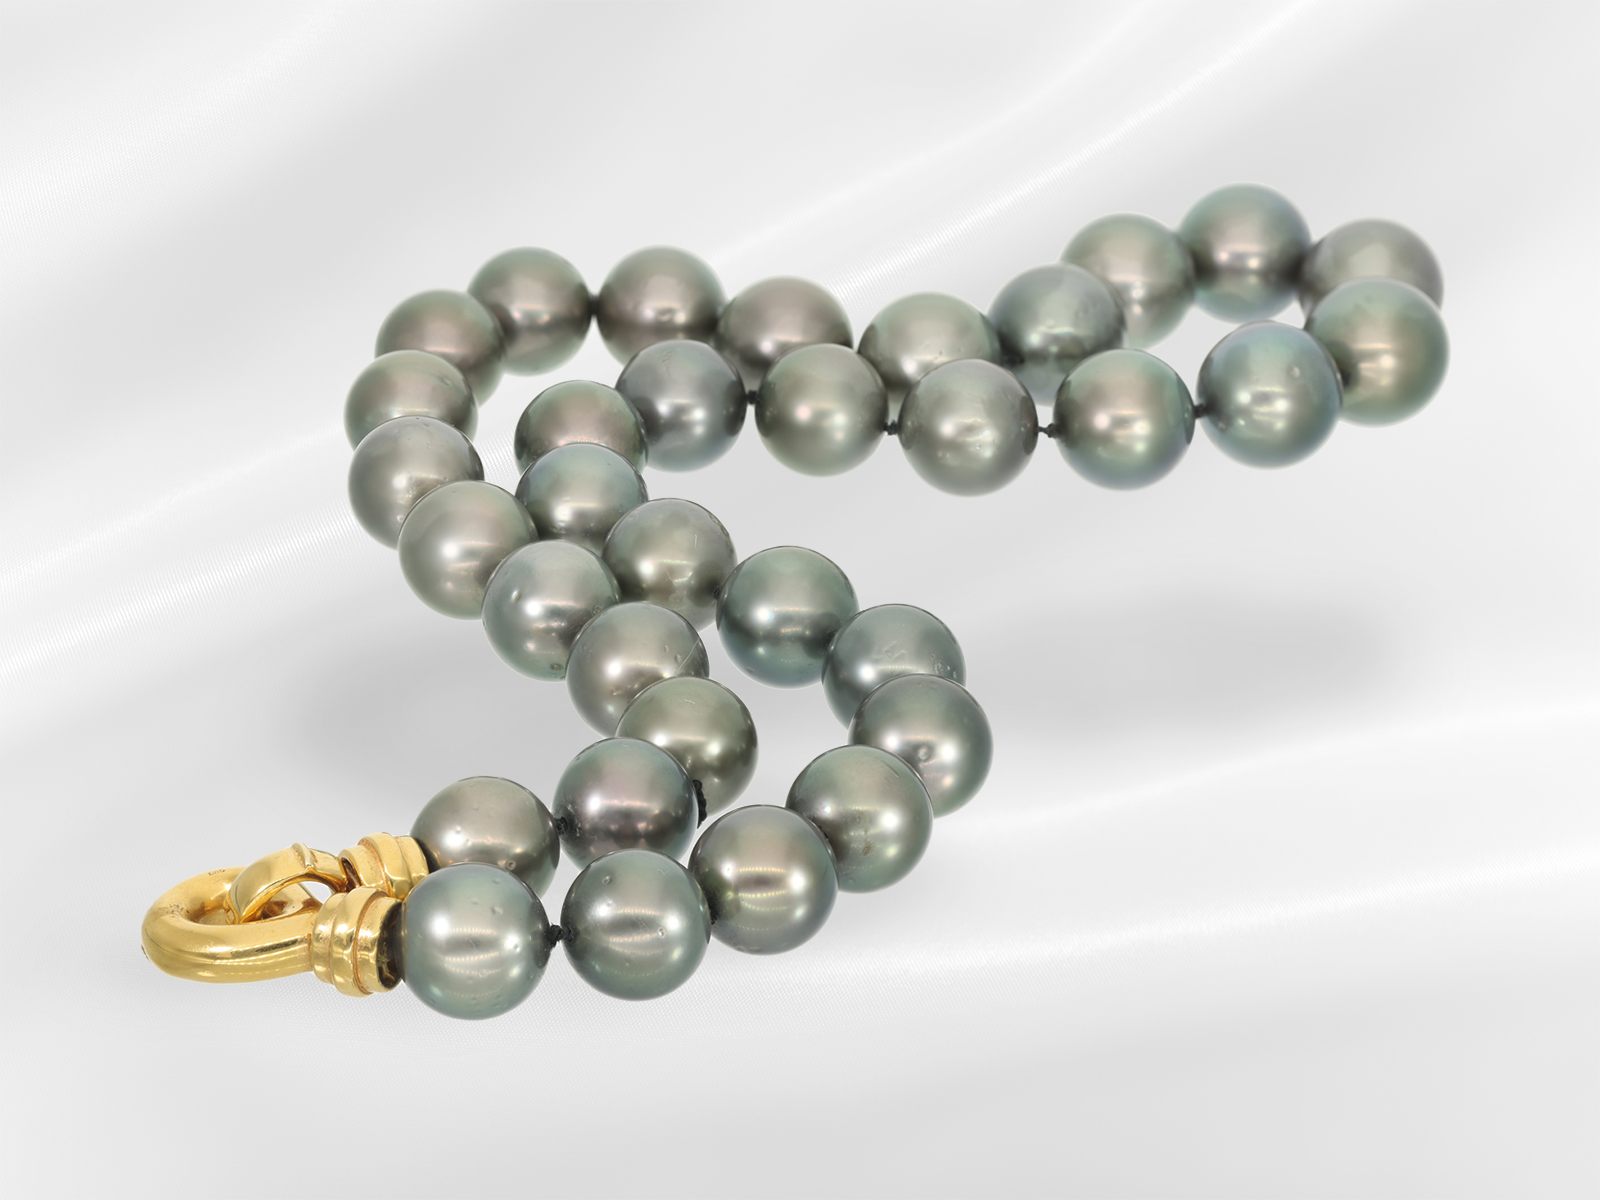 Necklace: formerly very expensive Tahitian pearl necklace 12-15mm!, original price approx. 13,000€,  - Image 6 of 6